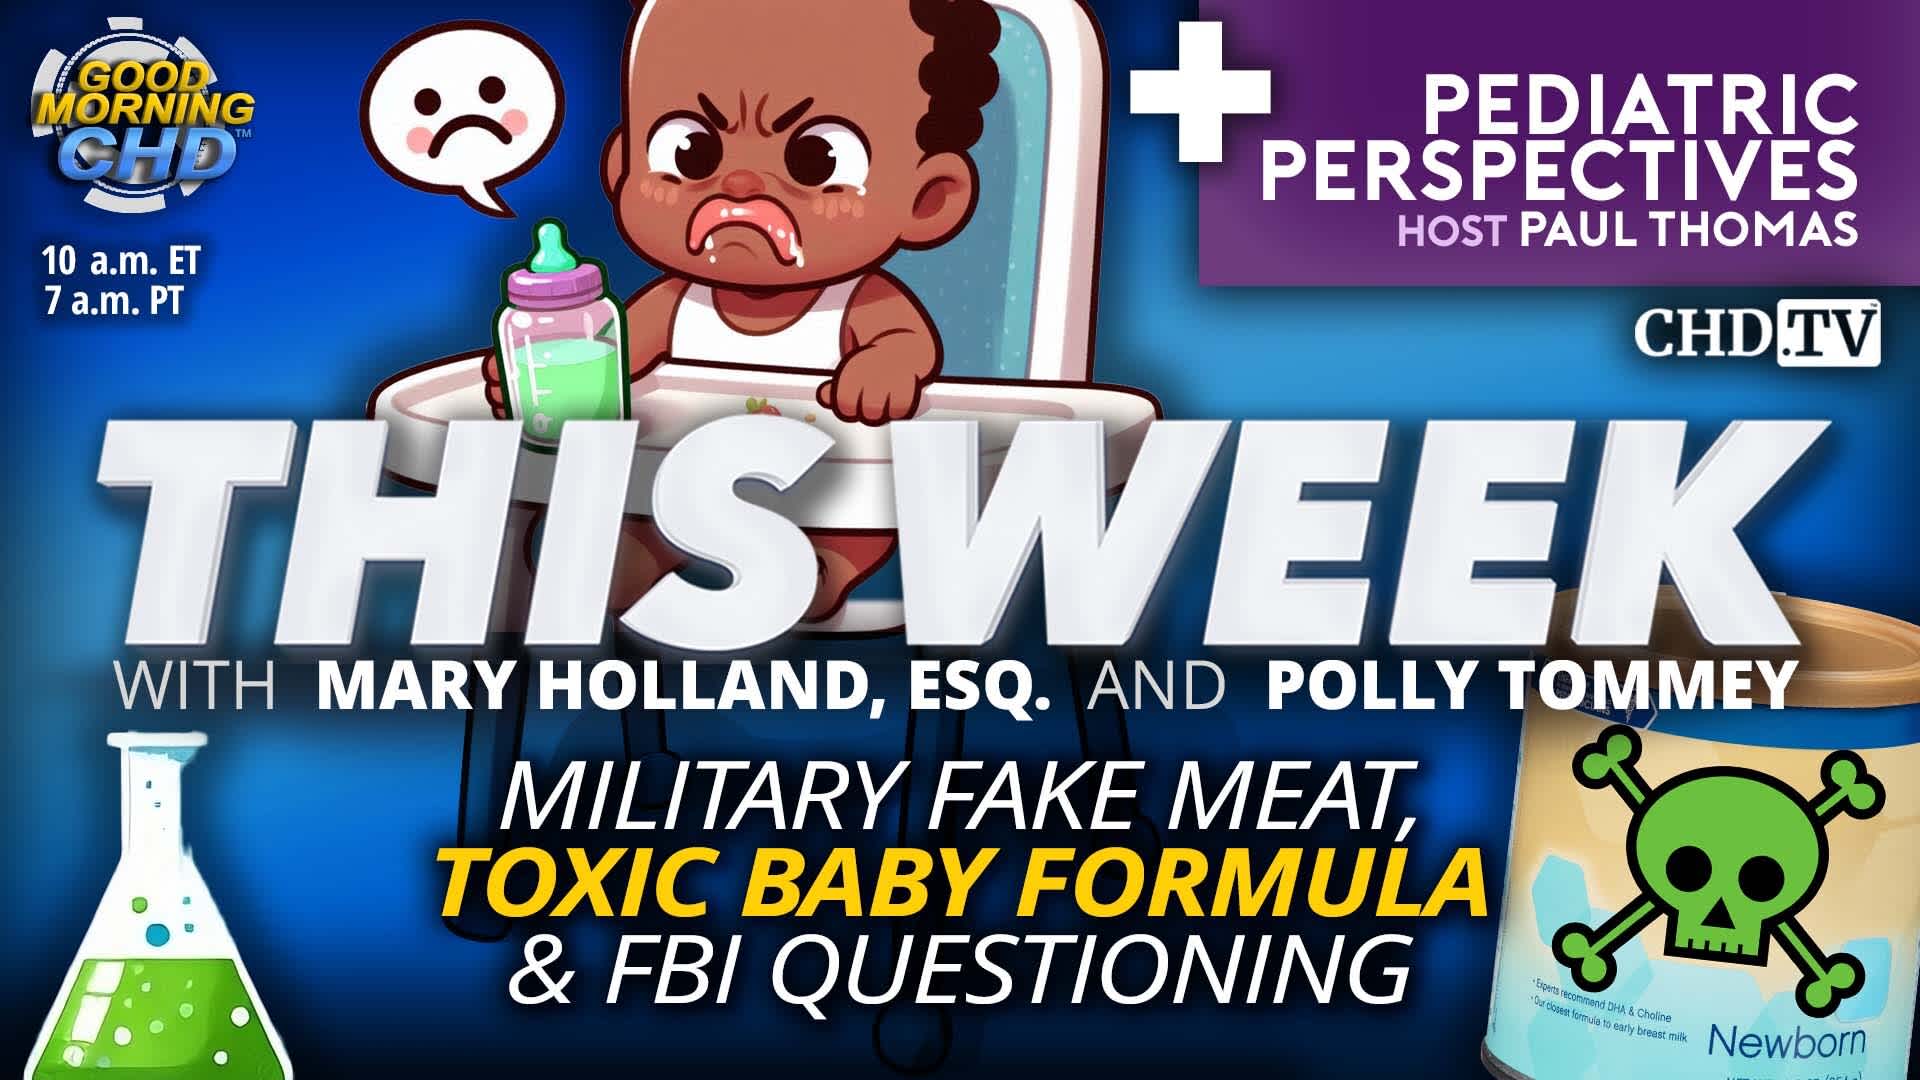 Military Fake Meat, Toxic Baby Formula & FBI Questioning